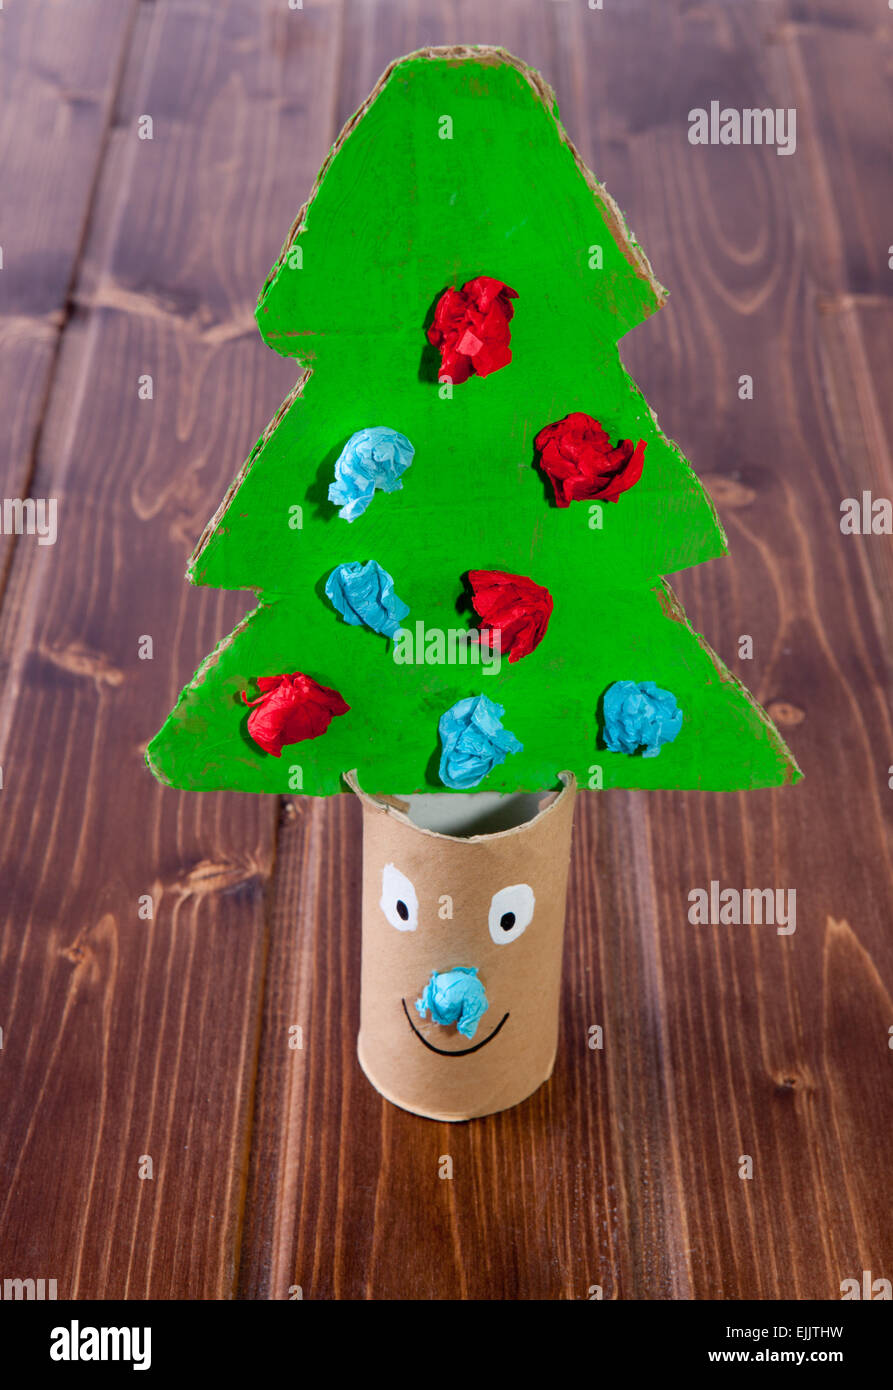 Cardboard Christmas tree made with recycled material over wooden surface Stock Photo